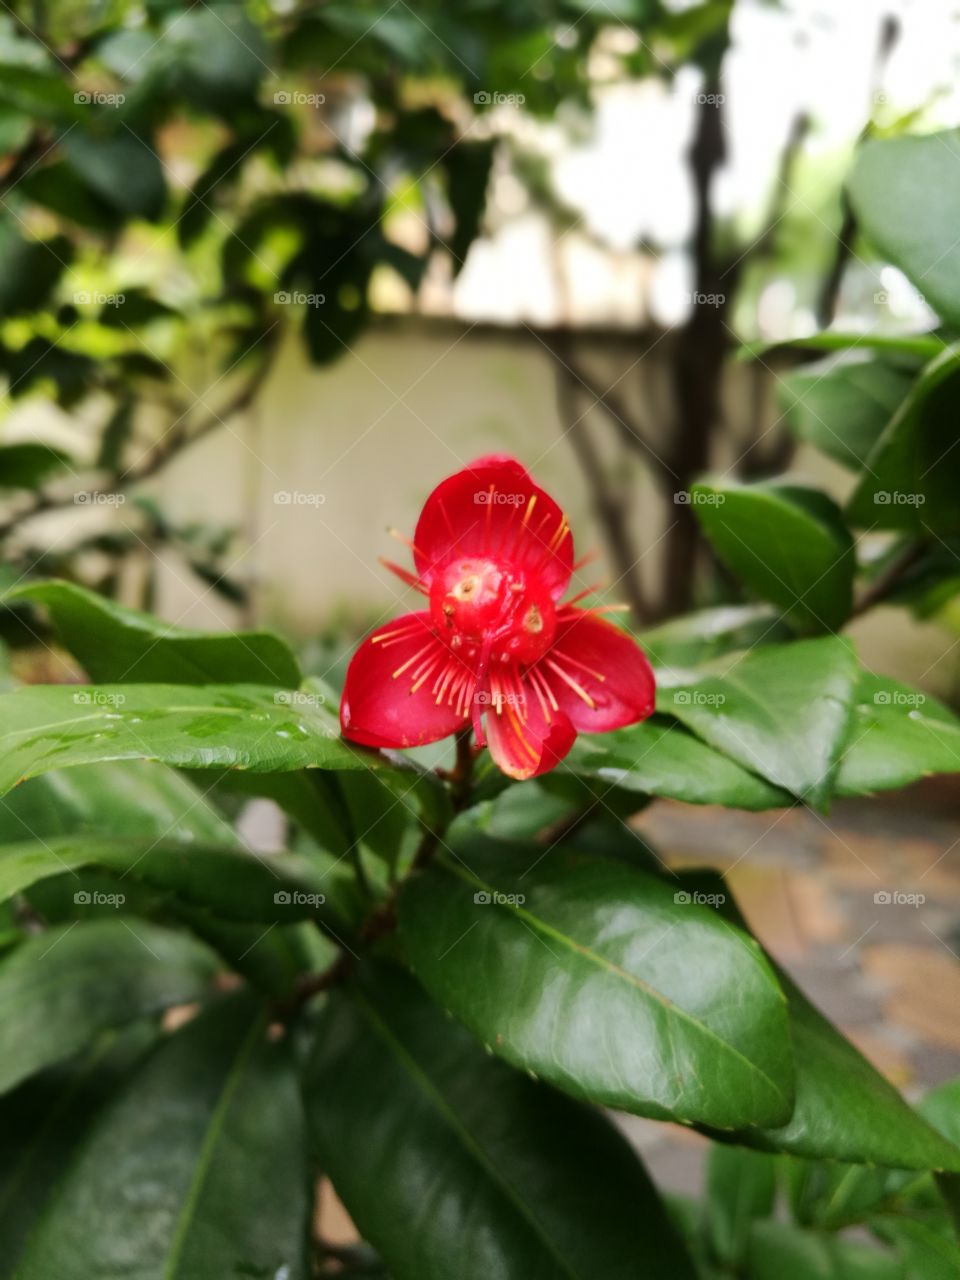 Red mickey mouse flower blooms in garden.